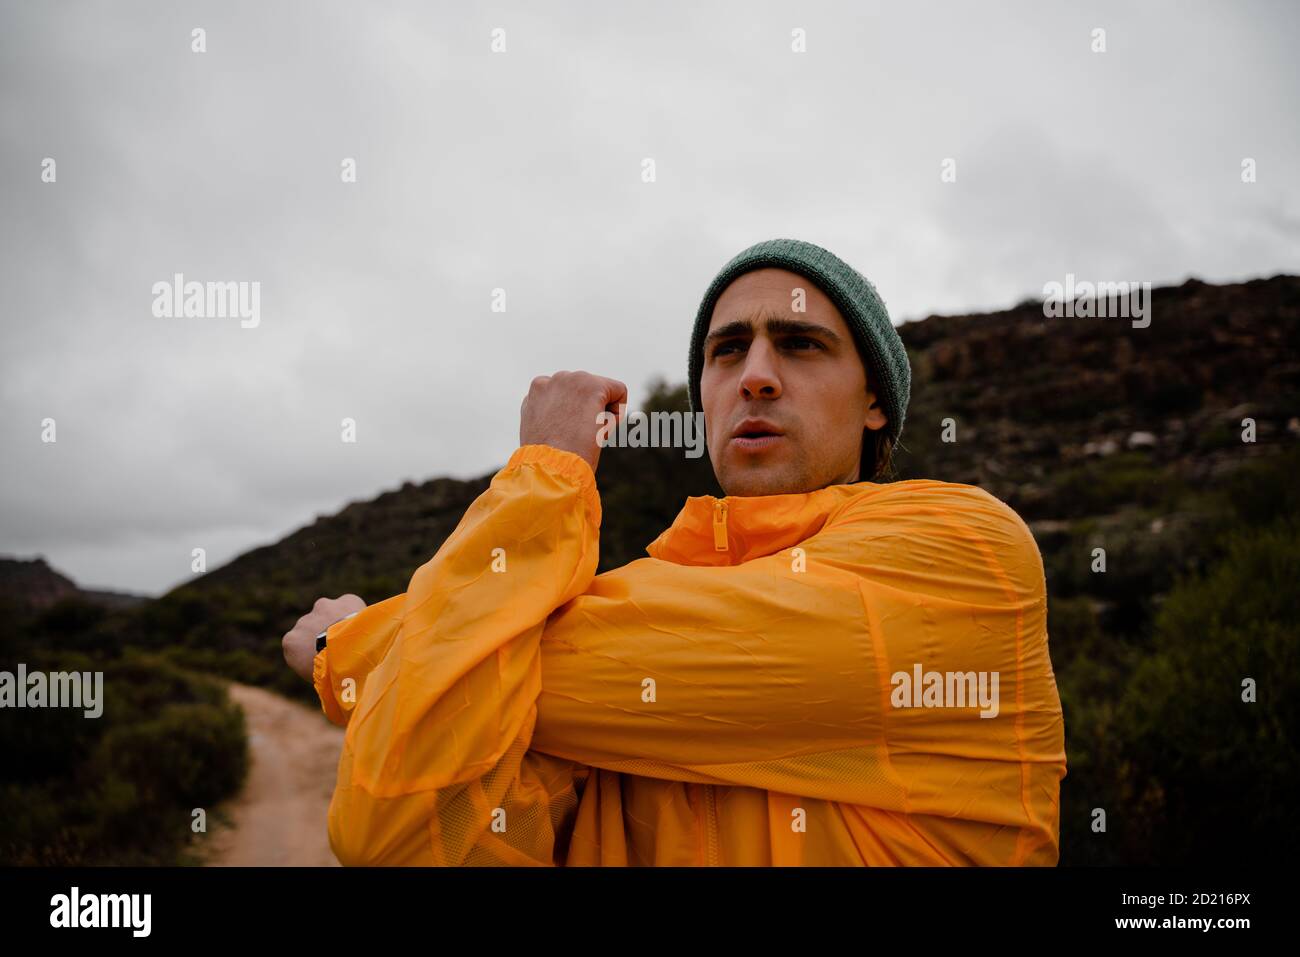 Young attractive male athlete focused on stretching arms before long distance run up mountain trail in cloudy weather Stock Photo